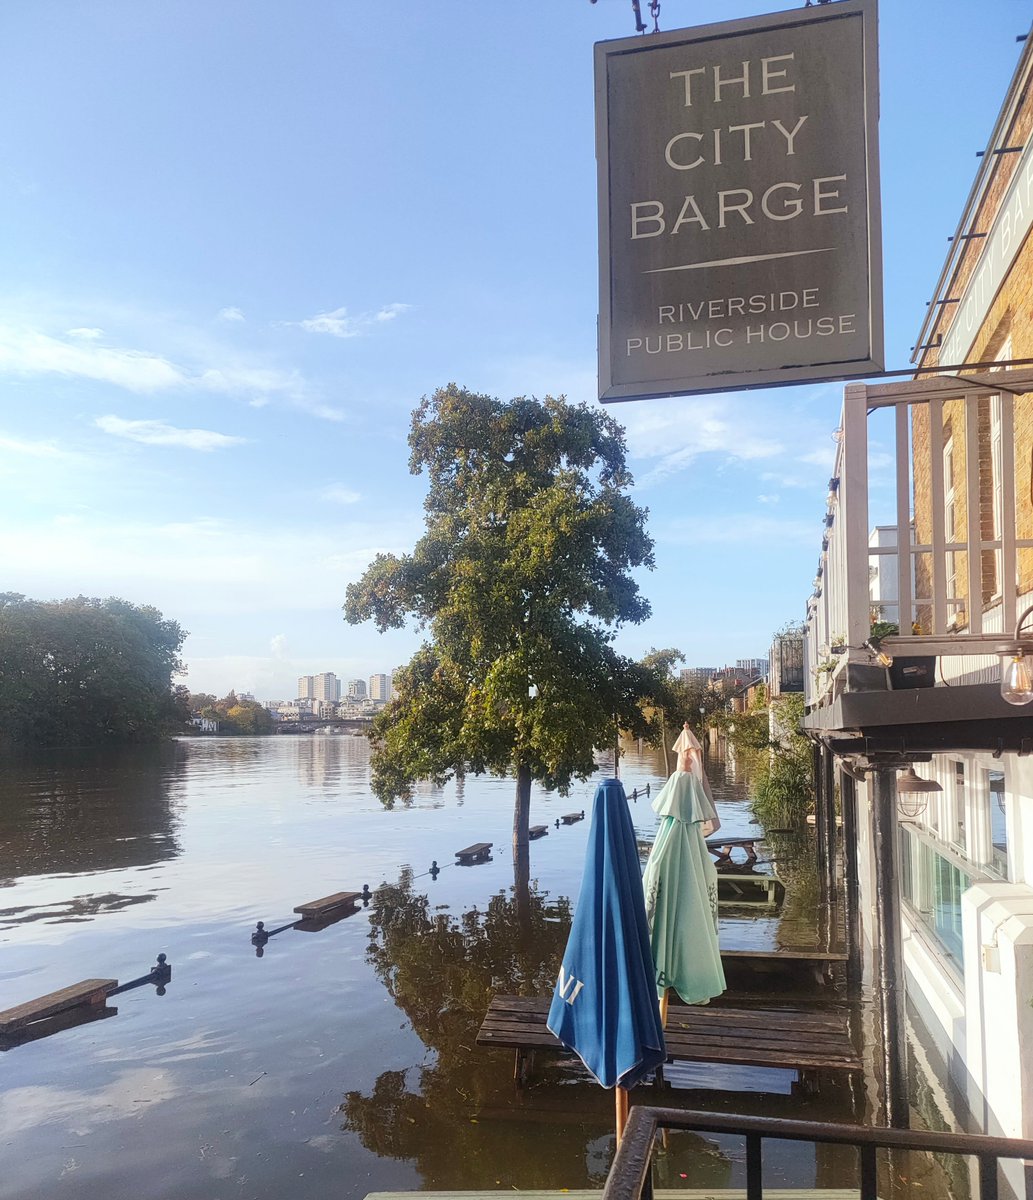 Now that's what I call a high tide! Enjoy the views from the safety of the City Barge, enter via the car park....#hightide #thames #riverside #riversidepubs #chiswick #riversidedining #publife